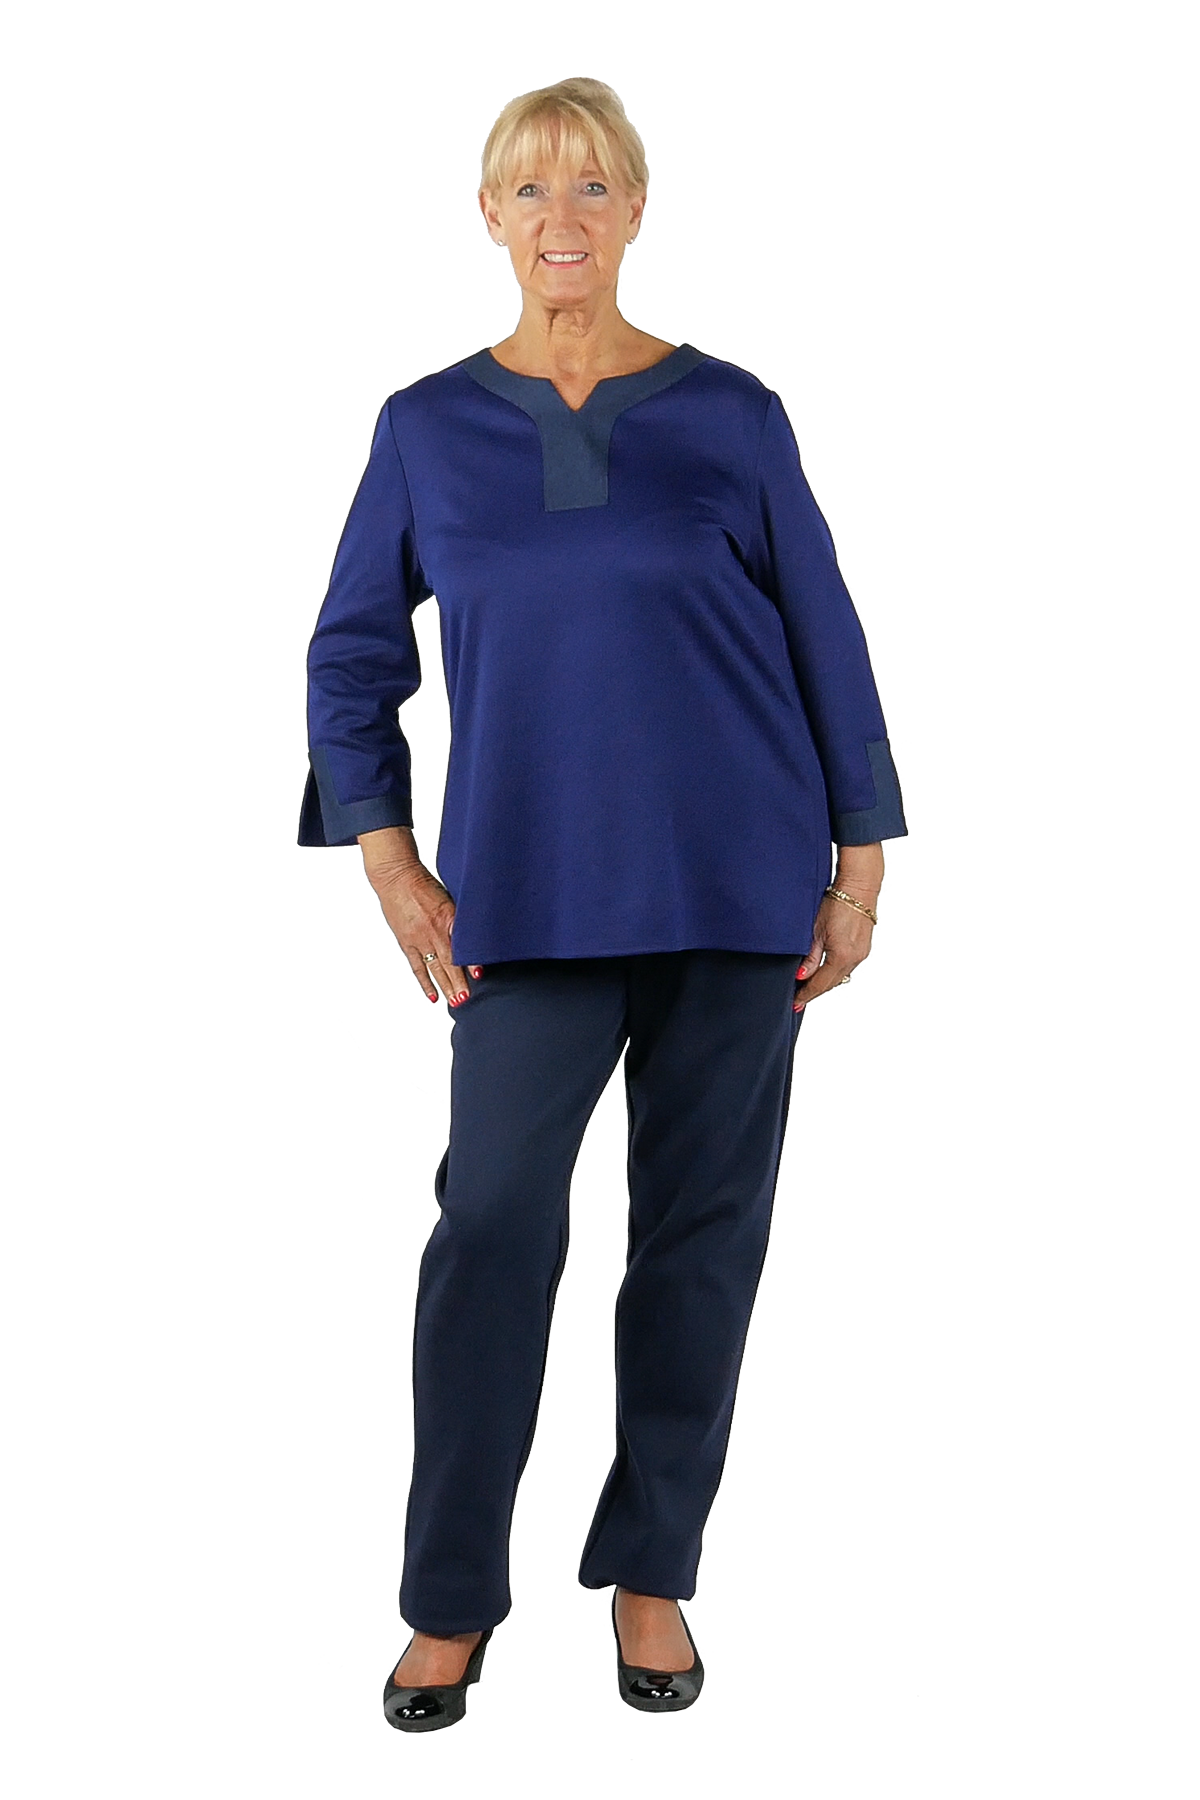 Attractive Adaptive Top for Women | Art in Aging